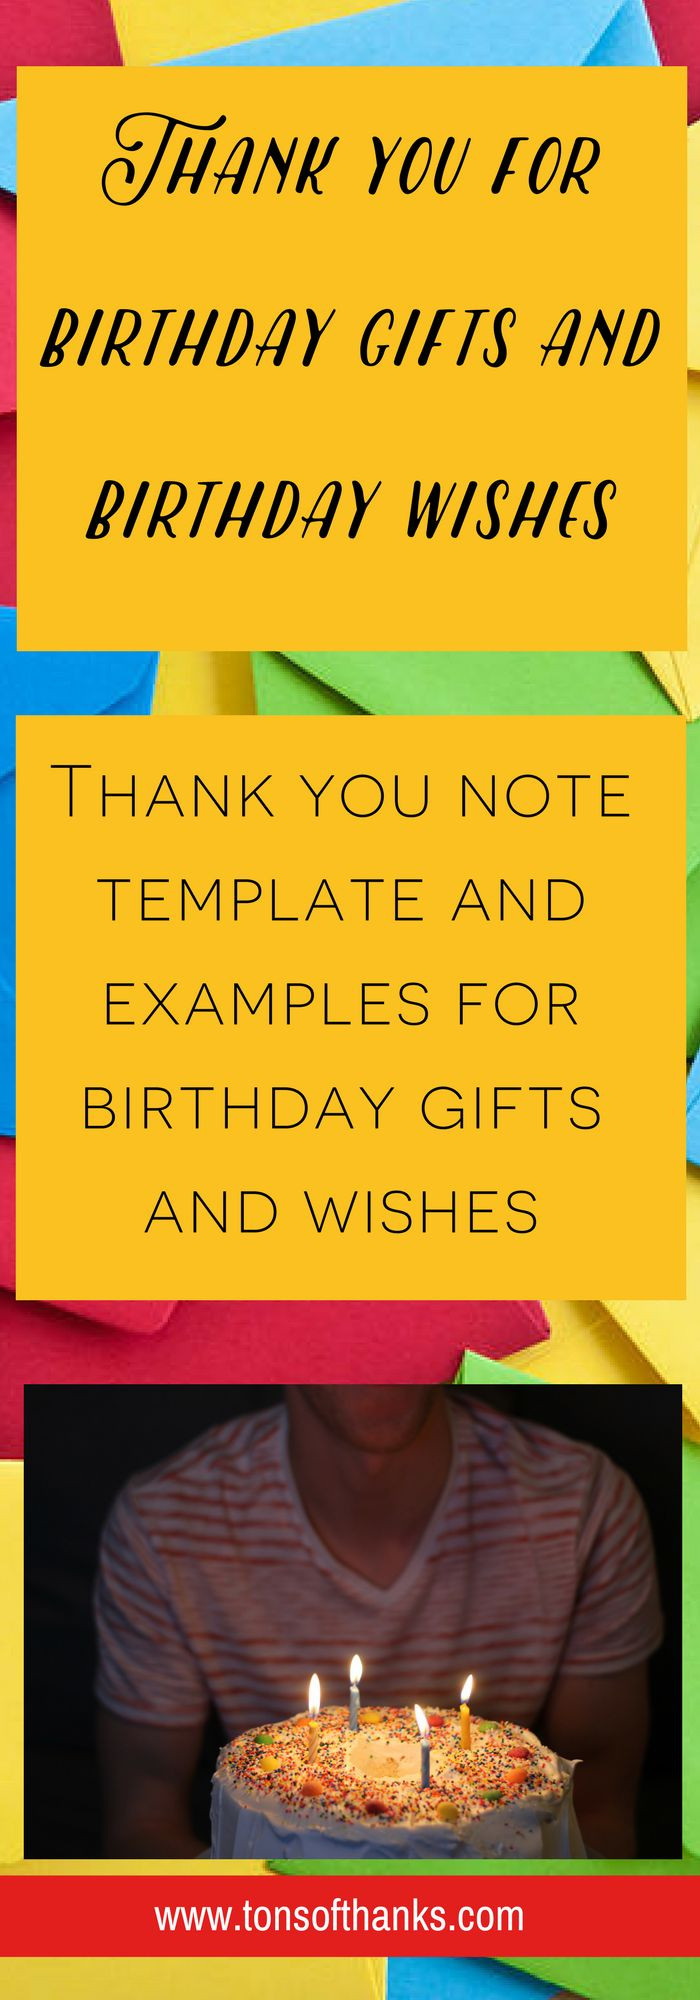 Thank You Notes For Birthday Gift
 36 best ideas about Thank you note ideas on Pinterest